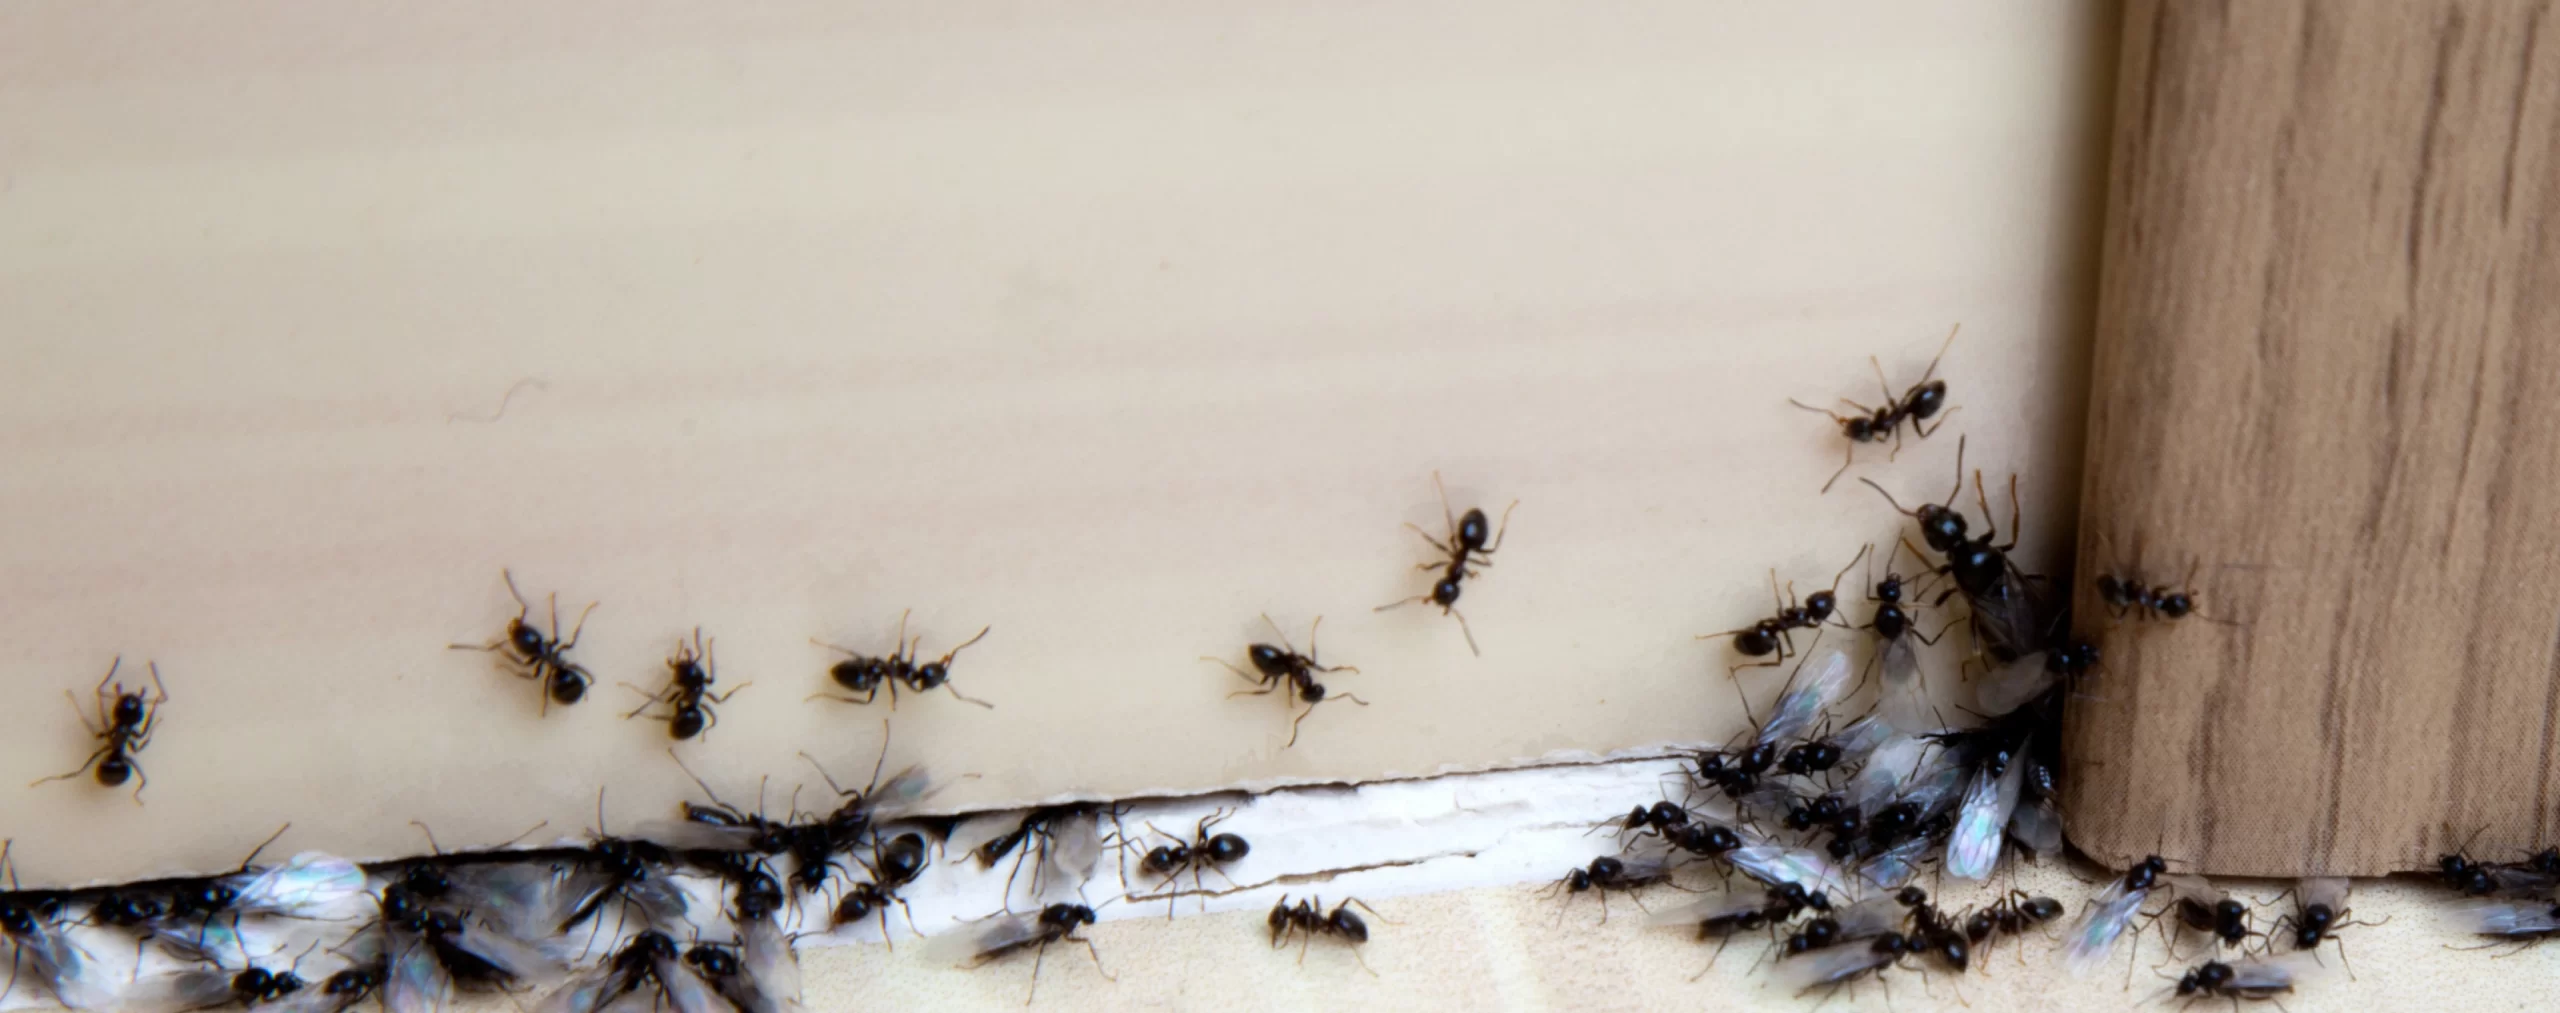 Get rid of your bed bug problem, no matter what ant species has visited you